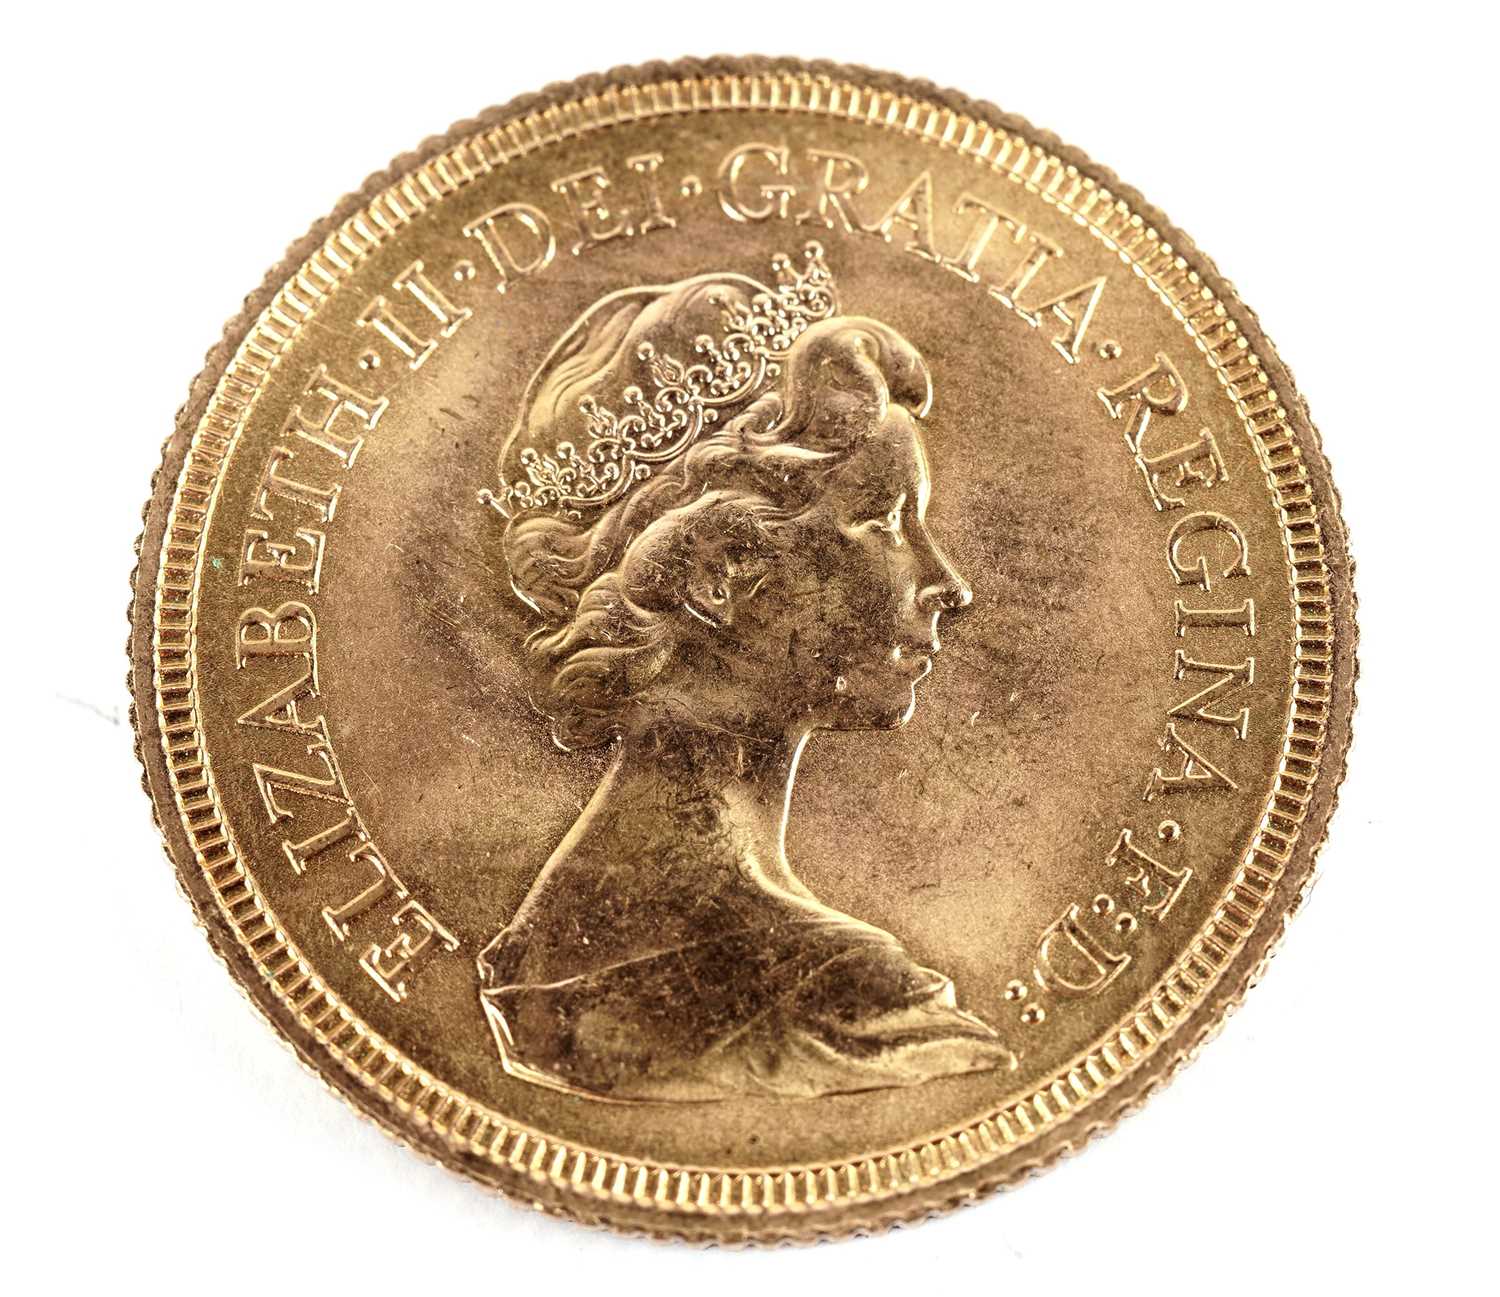 Two Queen Elizabeth II gold sovereigns 1974 - Image 3 of 5